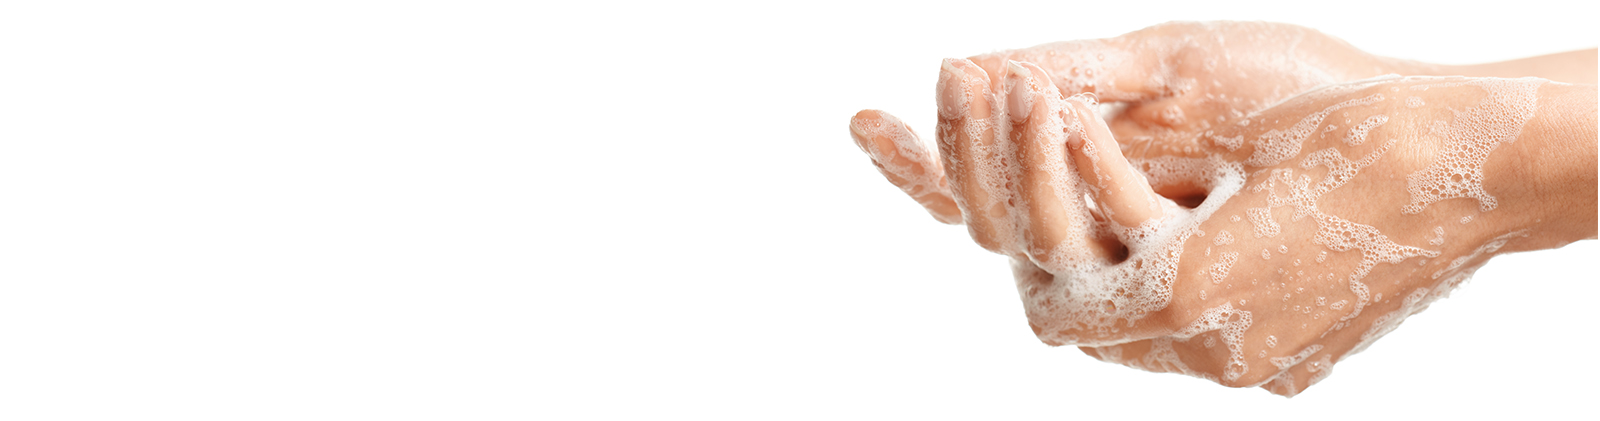 FDA Bans Antibacterial Products – 6 Myths About Their Use and Safety